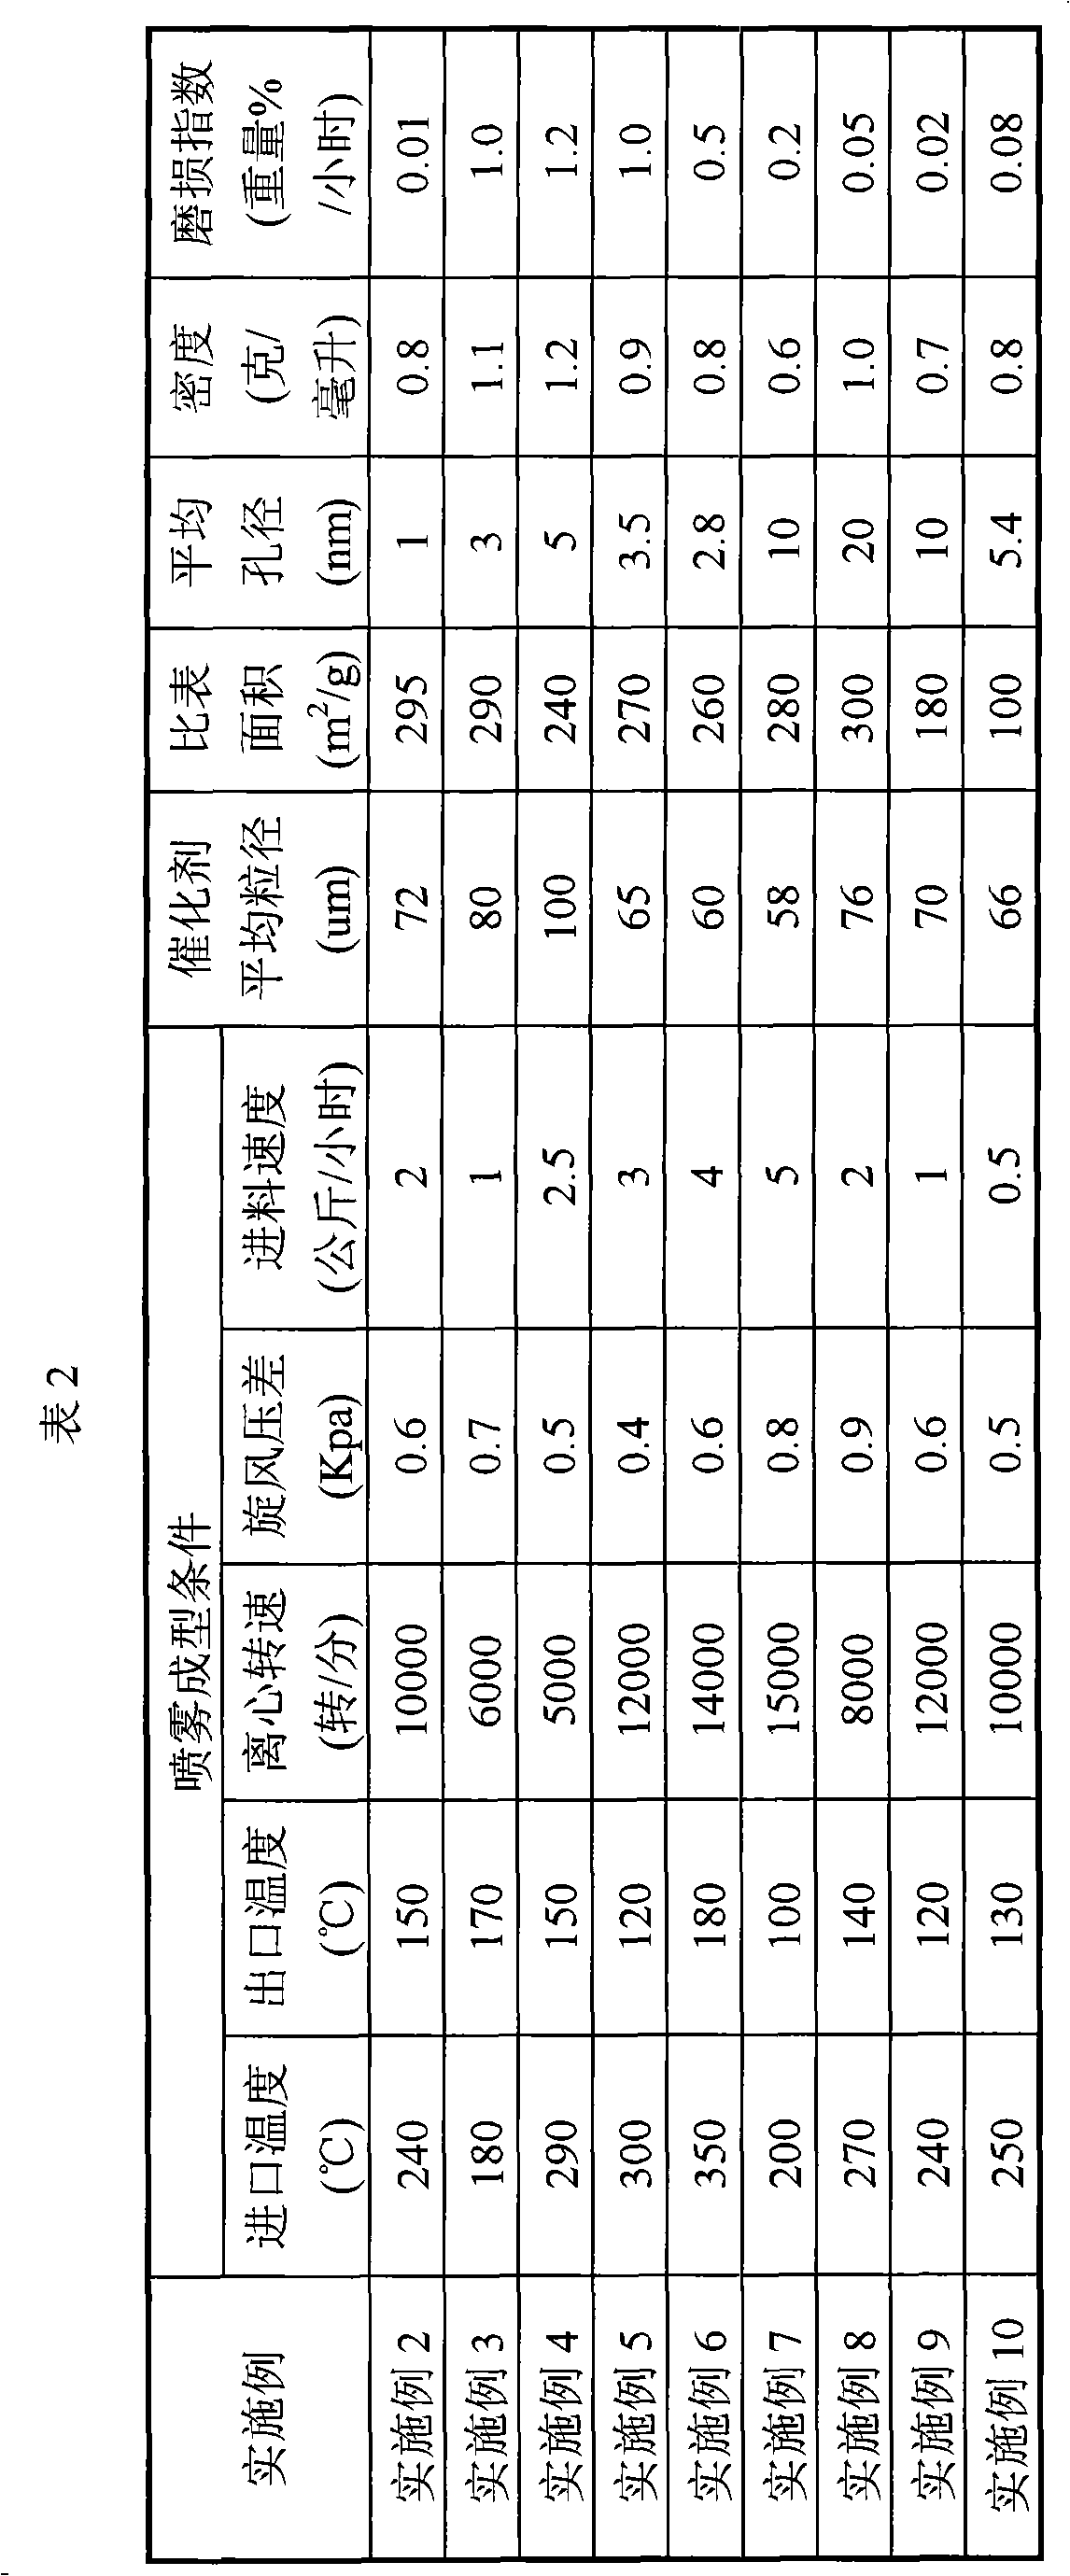 Method for producing olefin by catalytically cracking